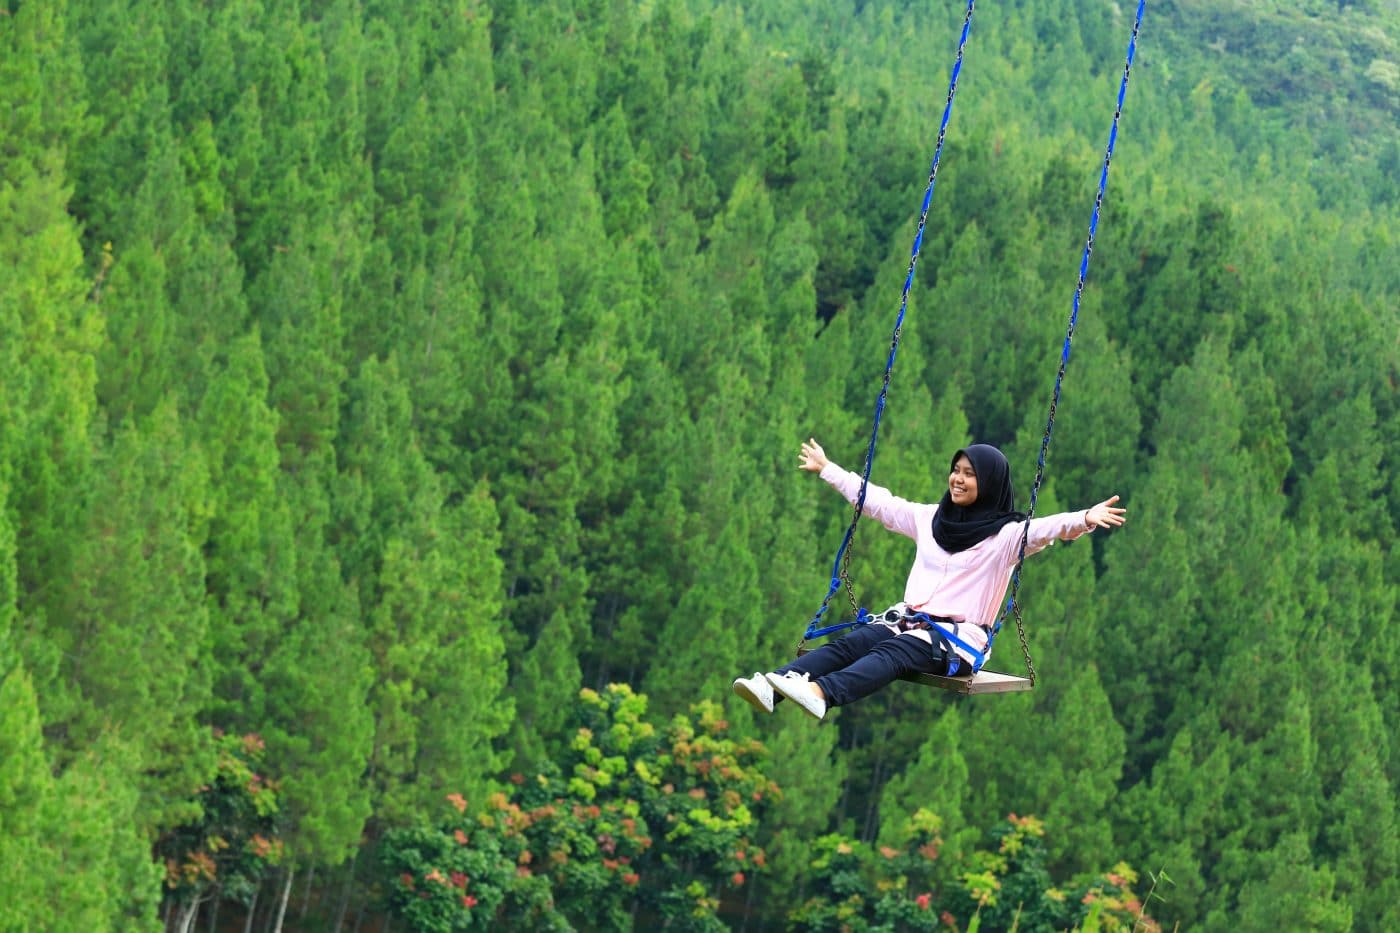 Woman on swing above trees, smiling